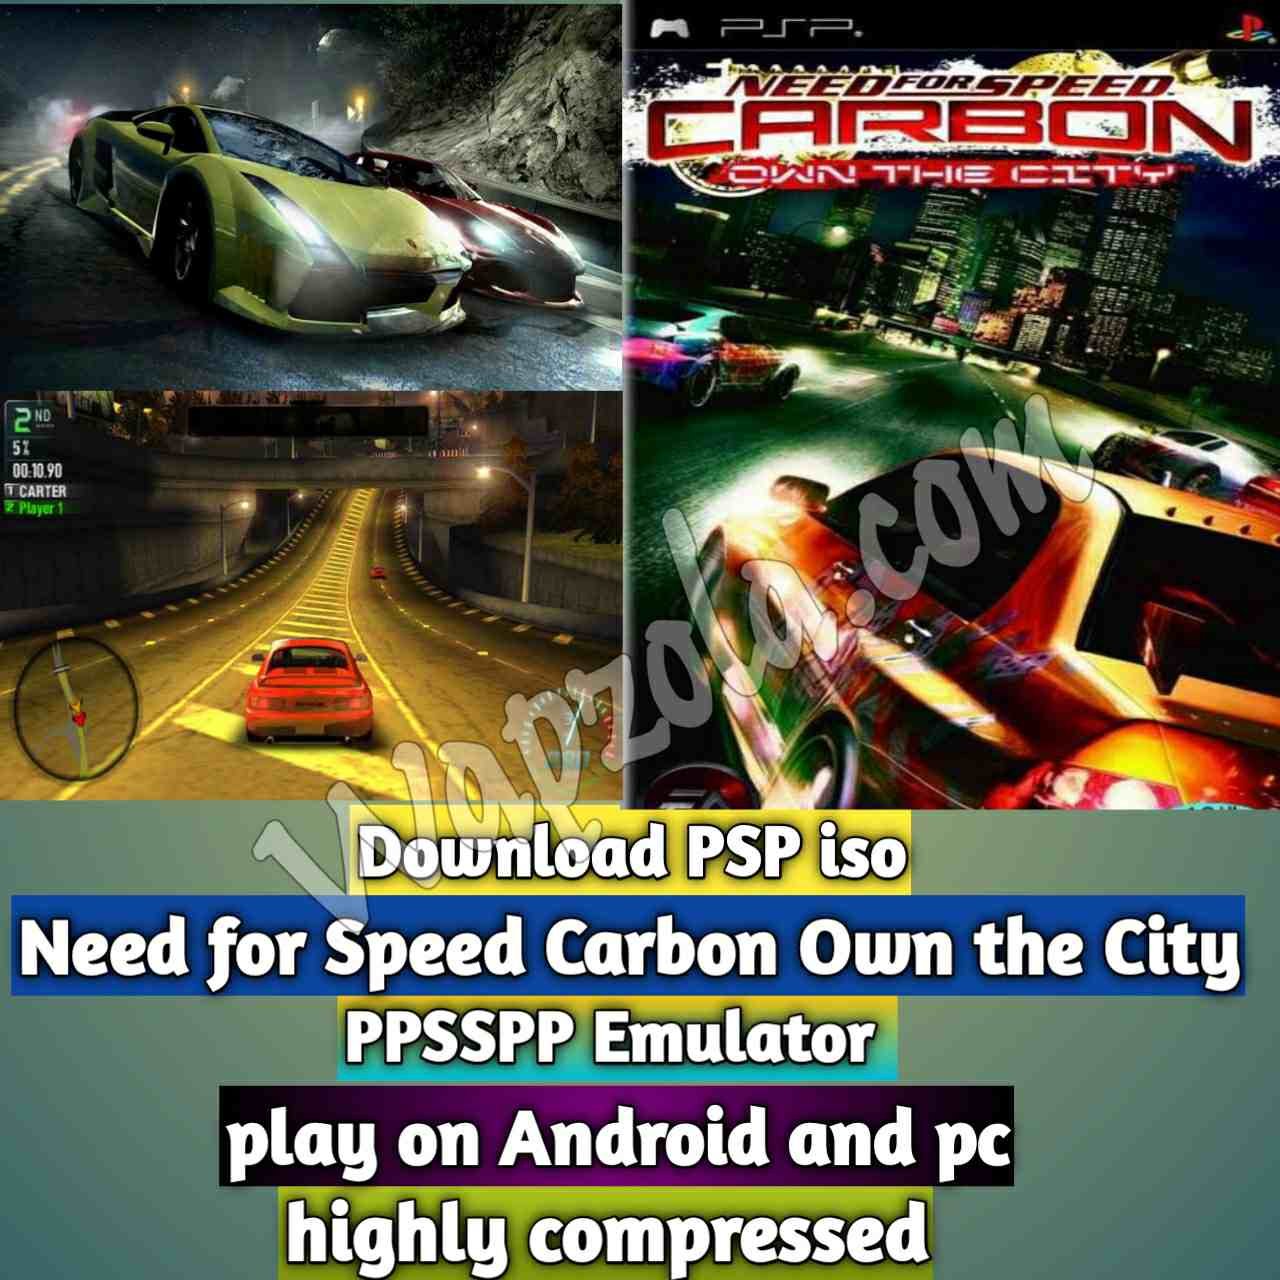 You are currently viewing [Download] Need for Speed Carbon Own the City iso ppsspp emulator – PSP APK Iso ROM highly compressed 50MB